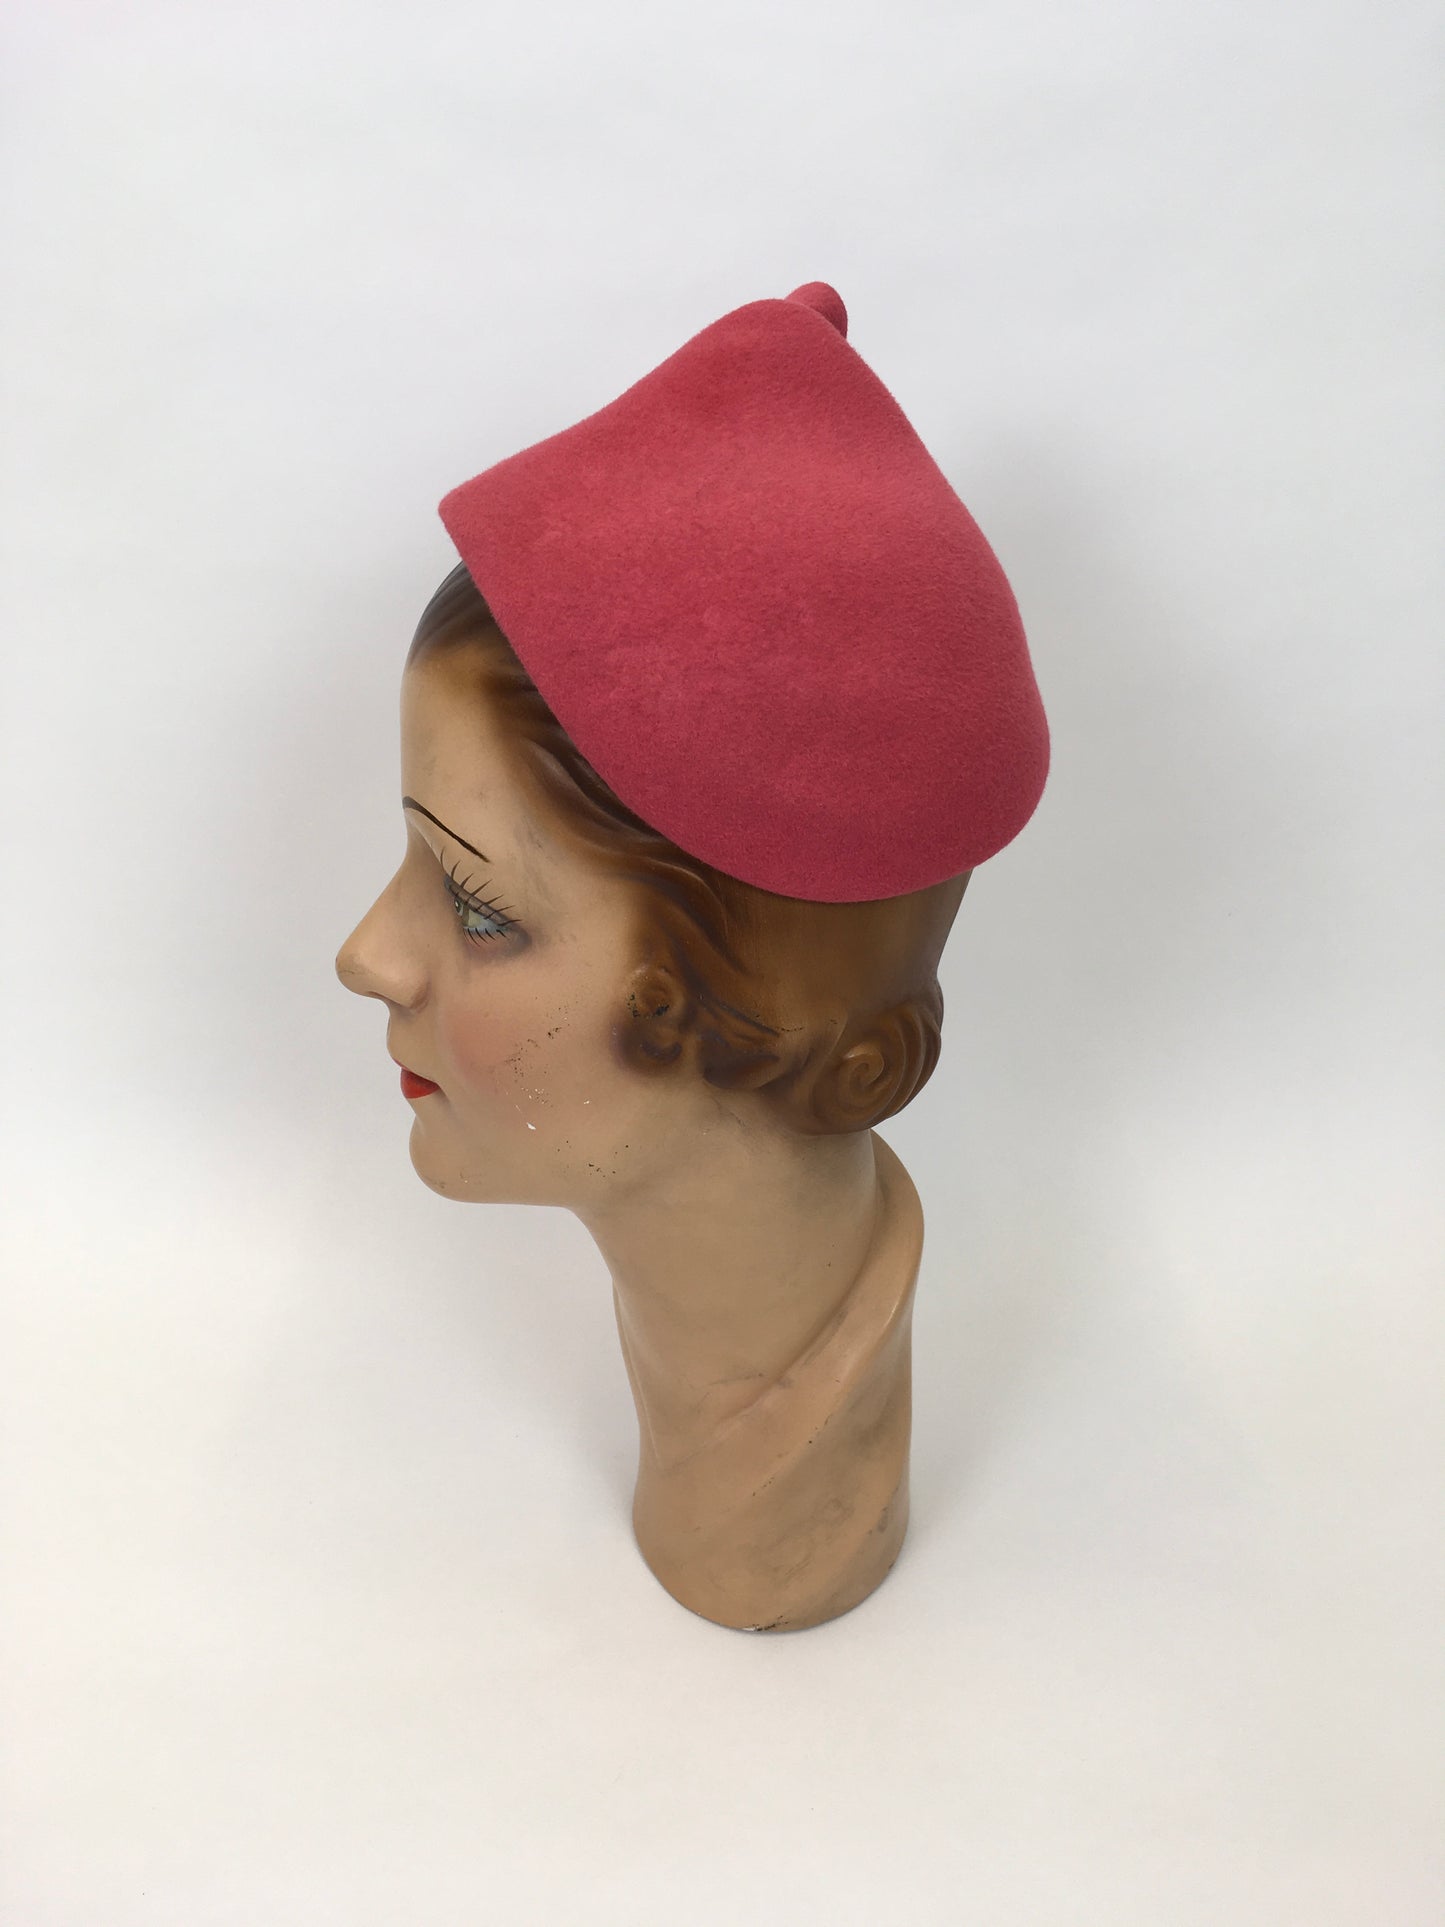 Original 1930’s AMAZING Raspberry Pink Pixie Hat - With a Fabulous Ostrich Feather Plume In Black